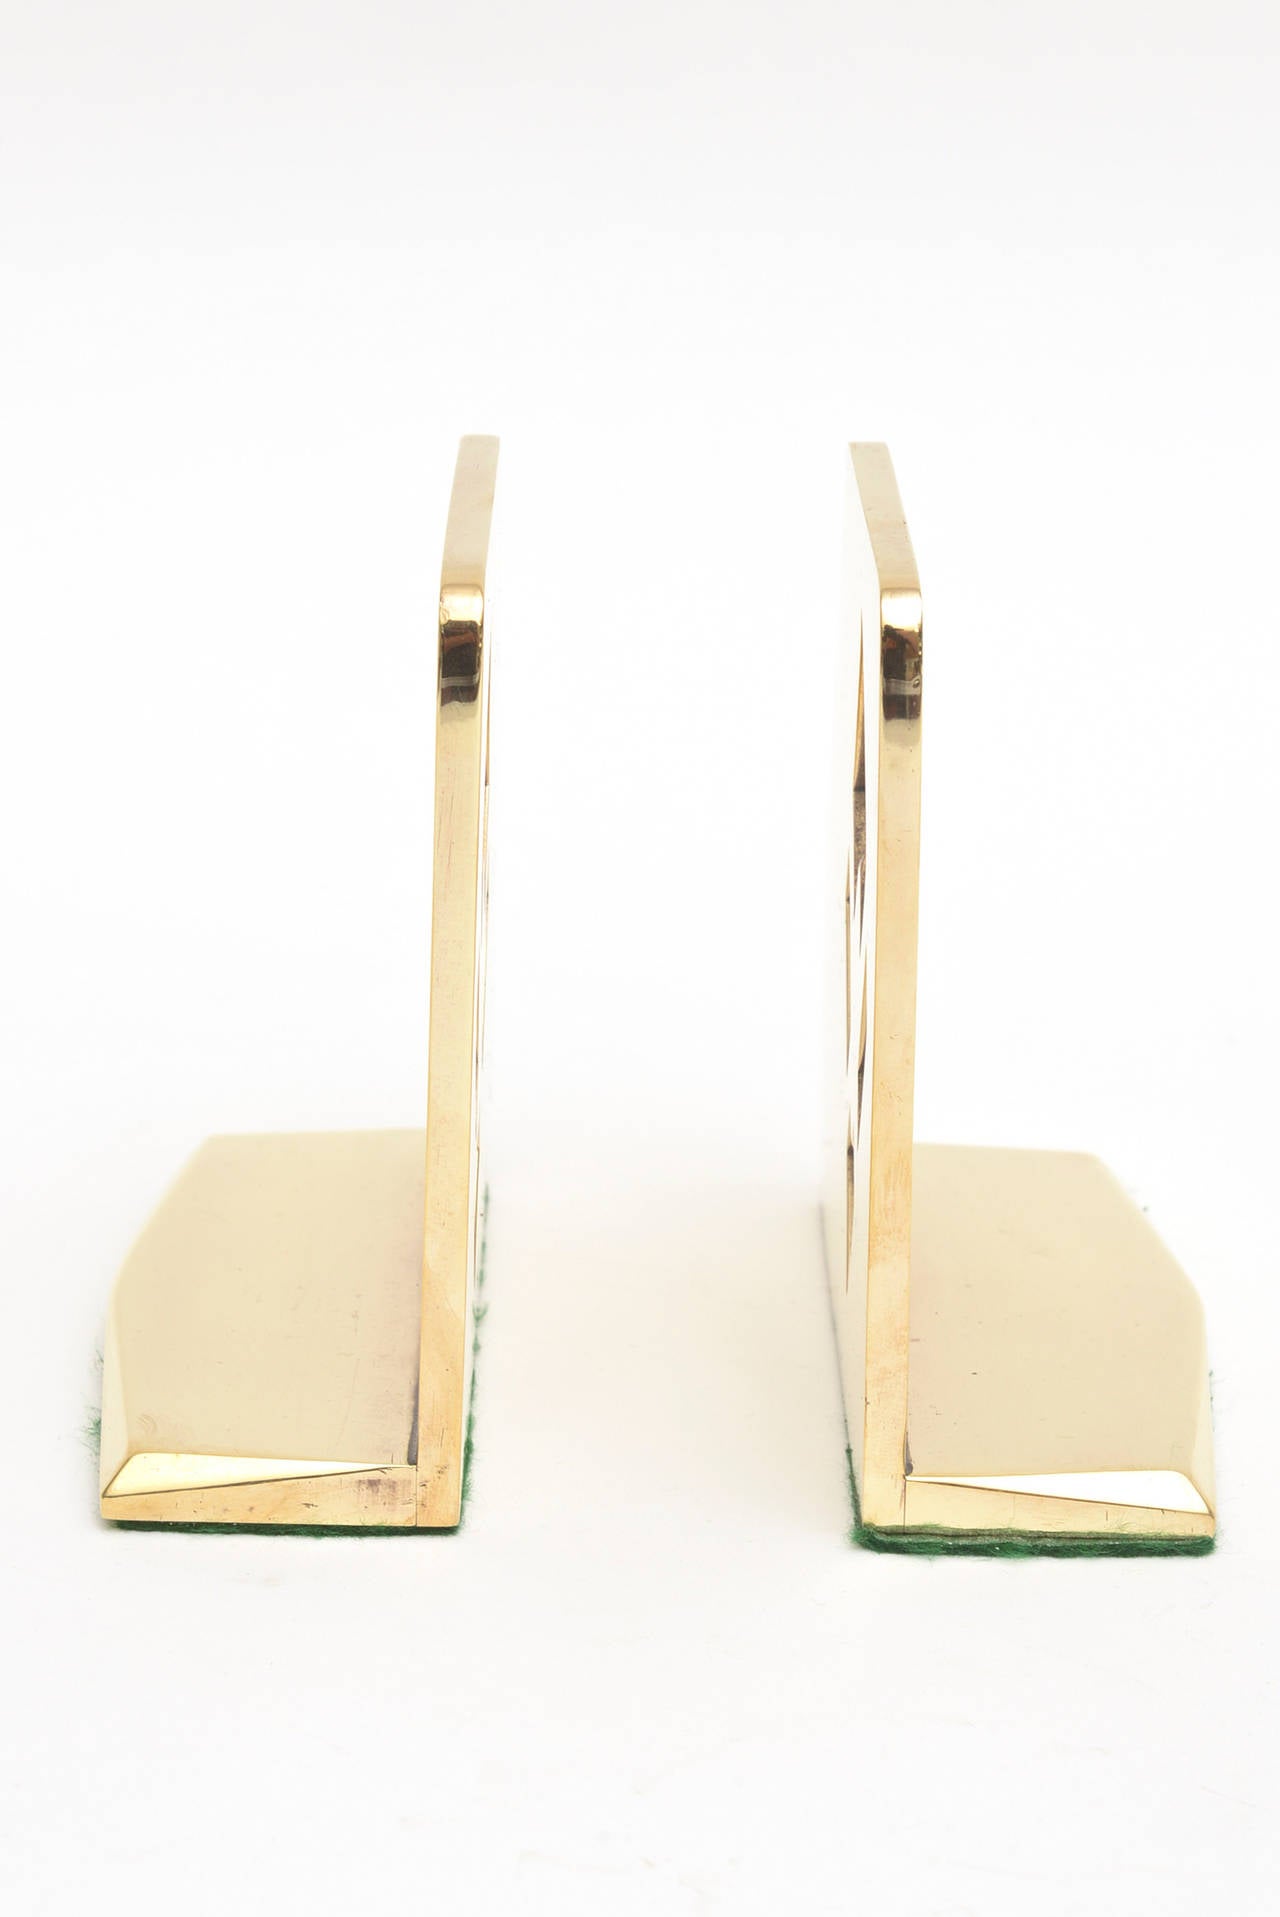 American Pair of Heavy Polished Brass Art Deco Cubist Bookends